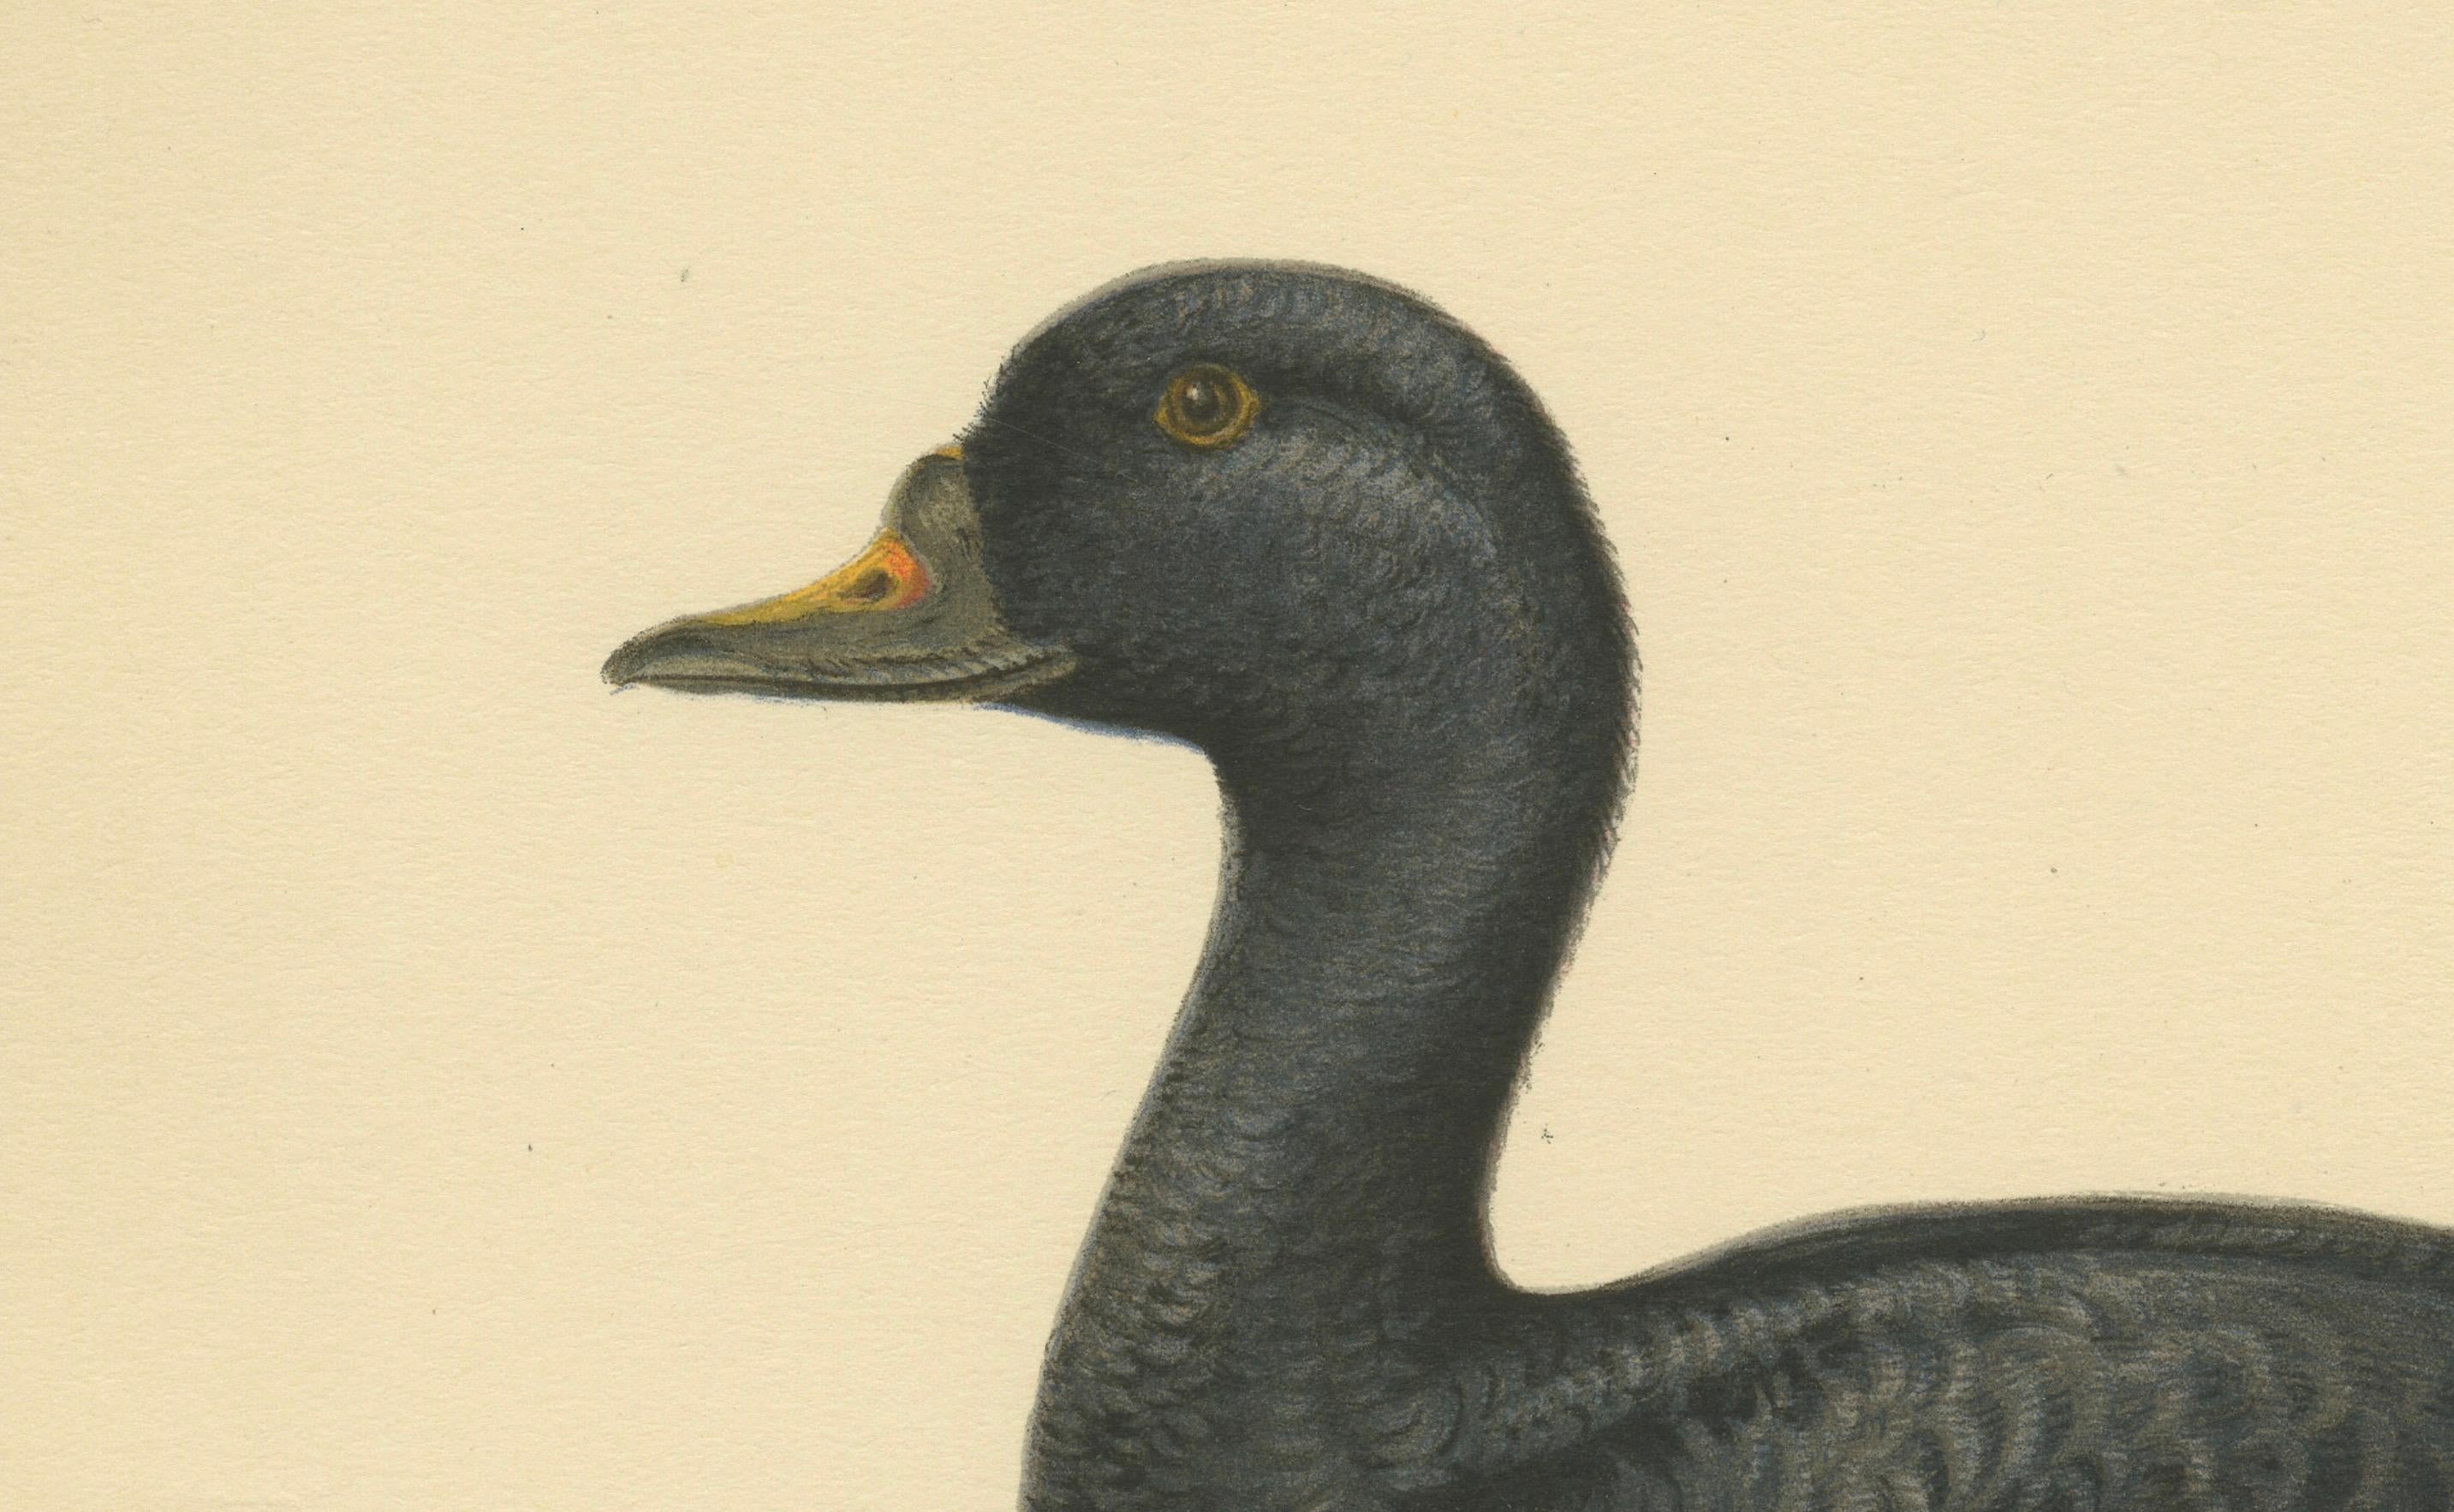 This print depicts the Black Scoter, a sea duck scientifically named Oidemia nigra, in a profile view as it floats on the water. The illustration is precise, capturing the bird's distinct all-dark plumage and the notable yellow knob at the base of